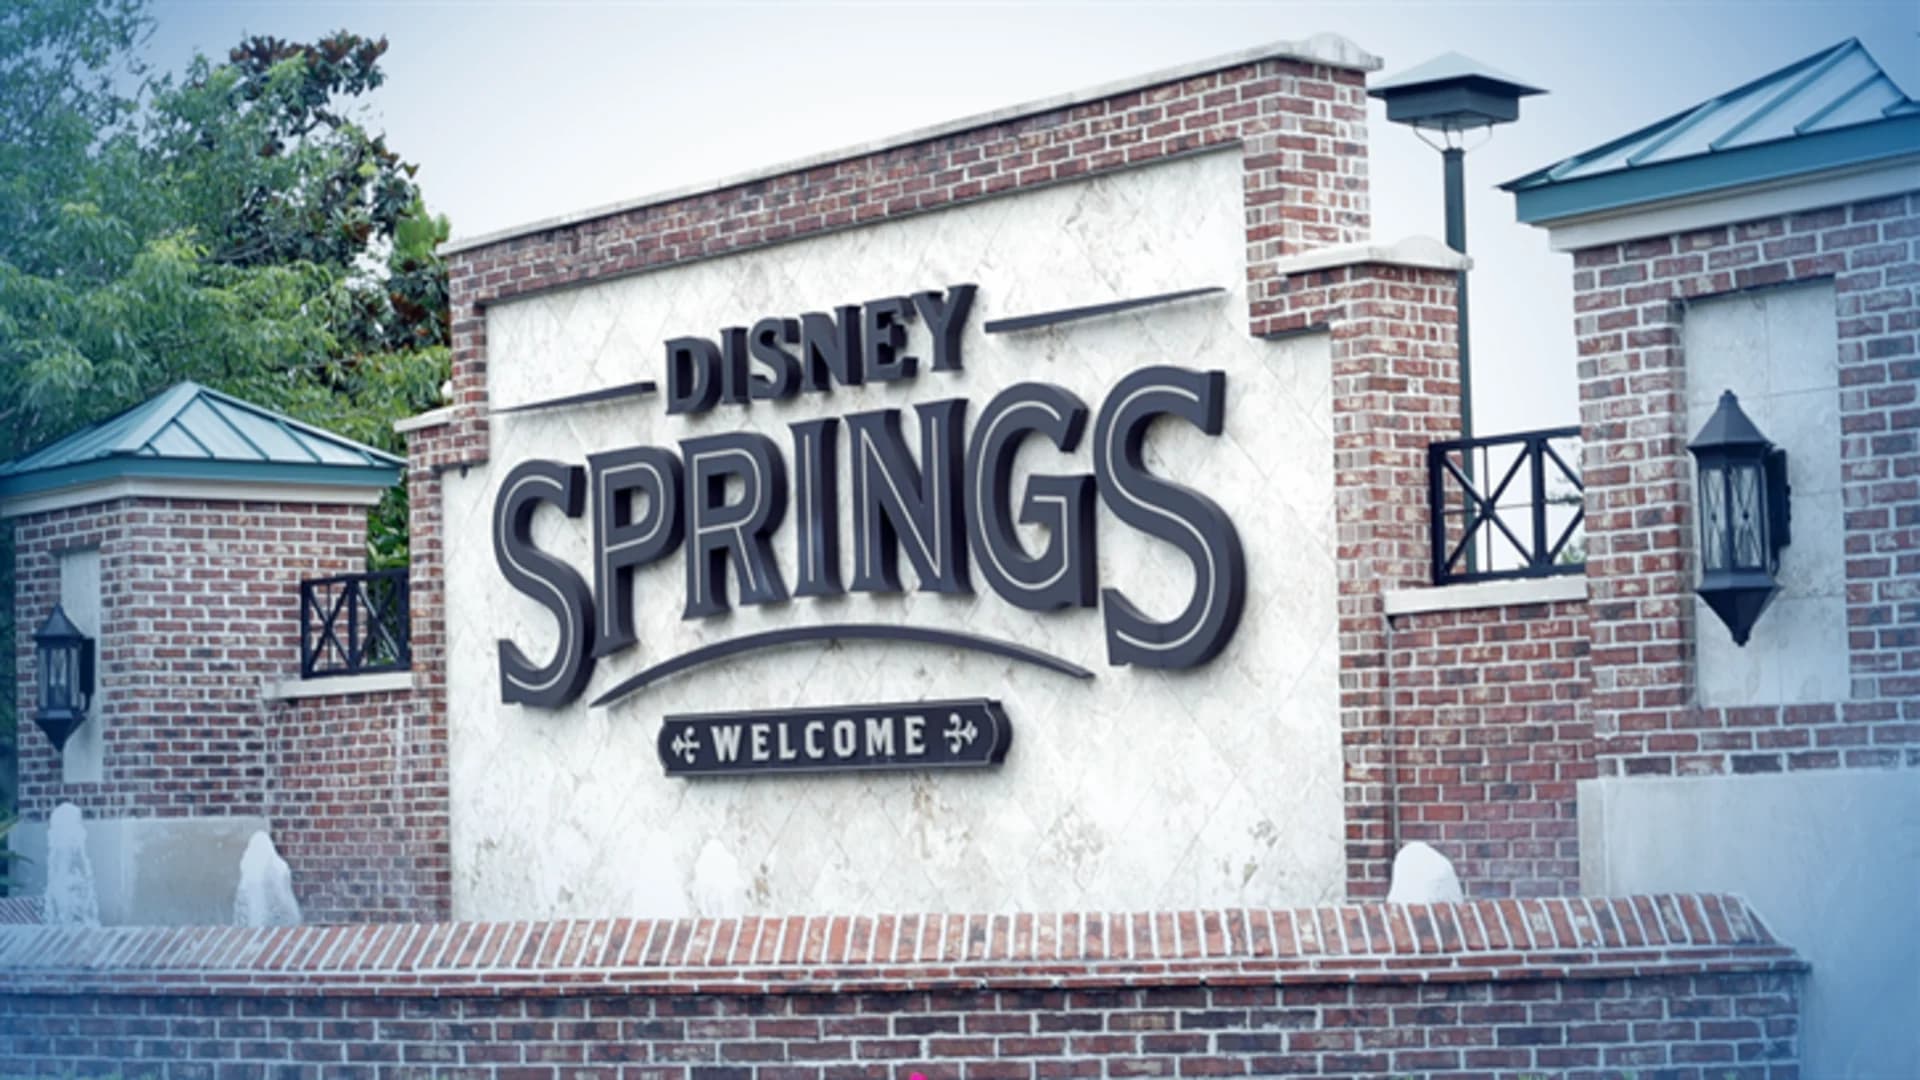 Disney Springs partially reopens. Here are what visitors need to know